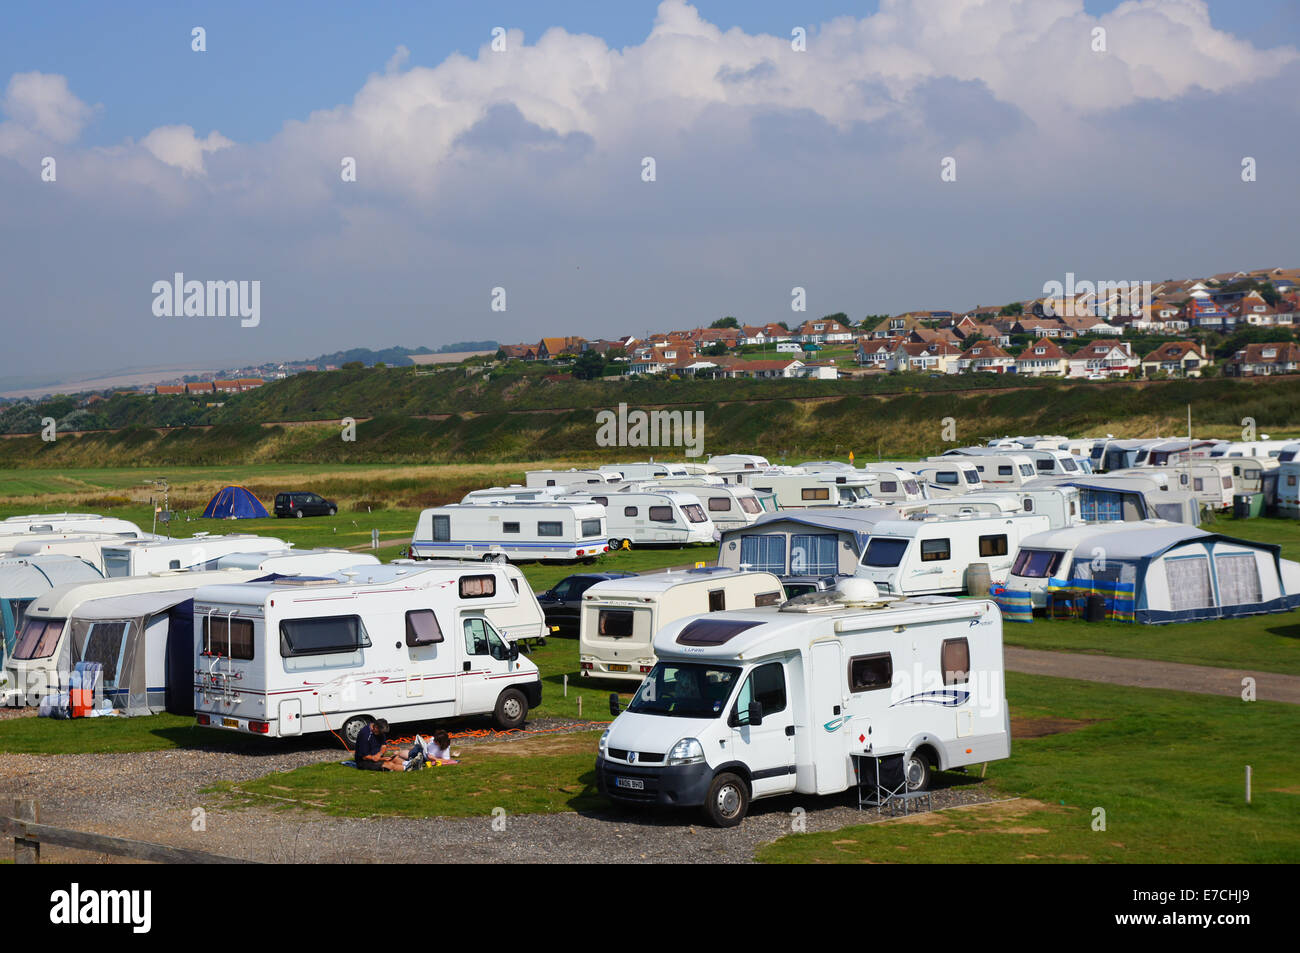 A caravan site, motorhomes caravans campers next to the beach at Seaford East Sussex England United Kingdom UK Stock Photo